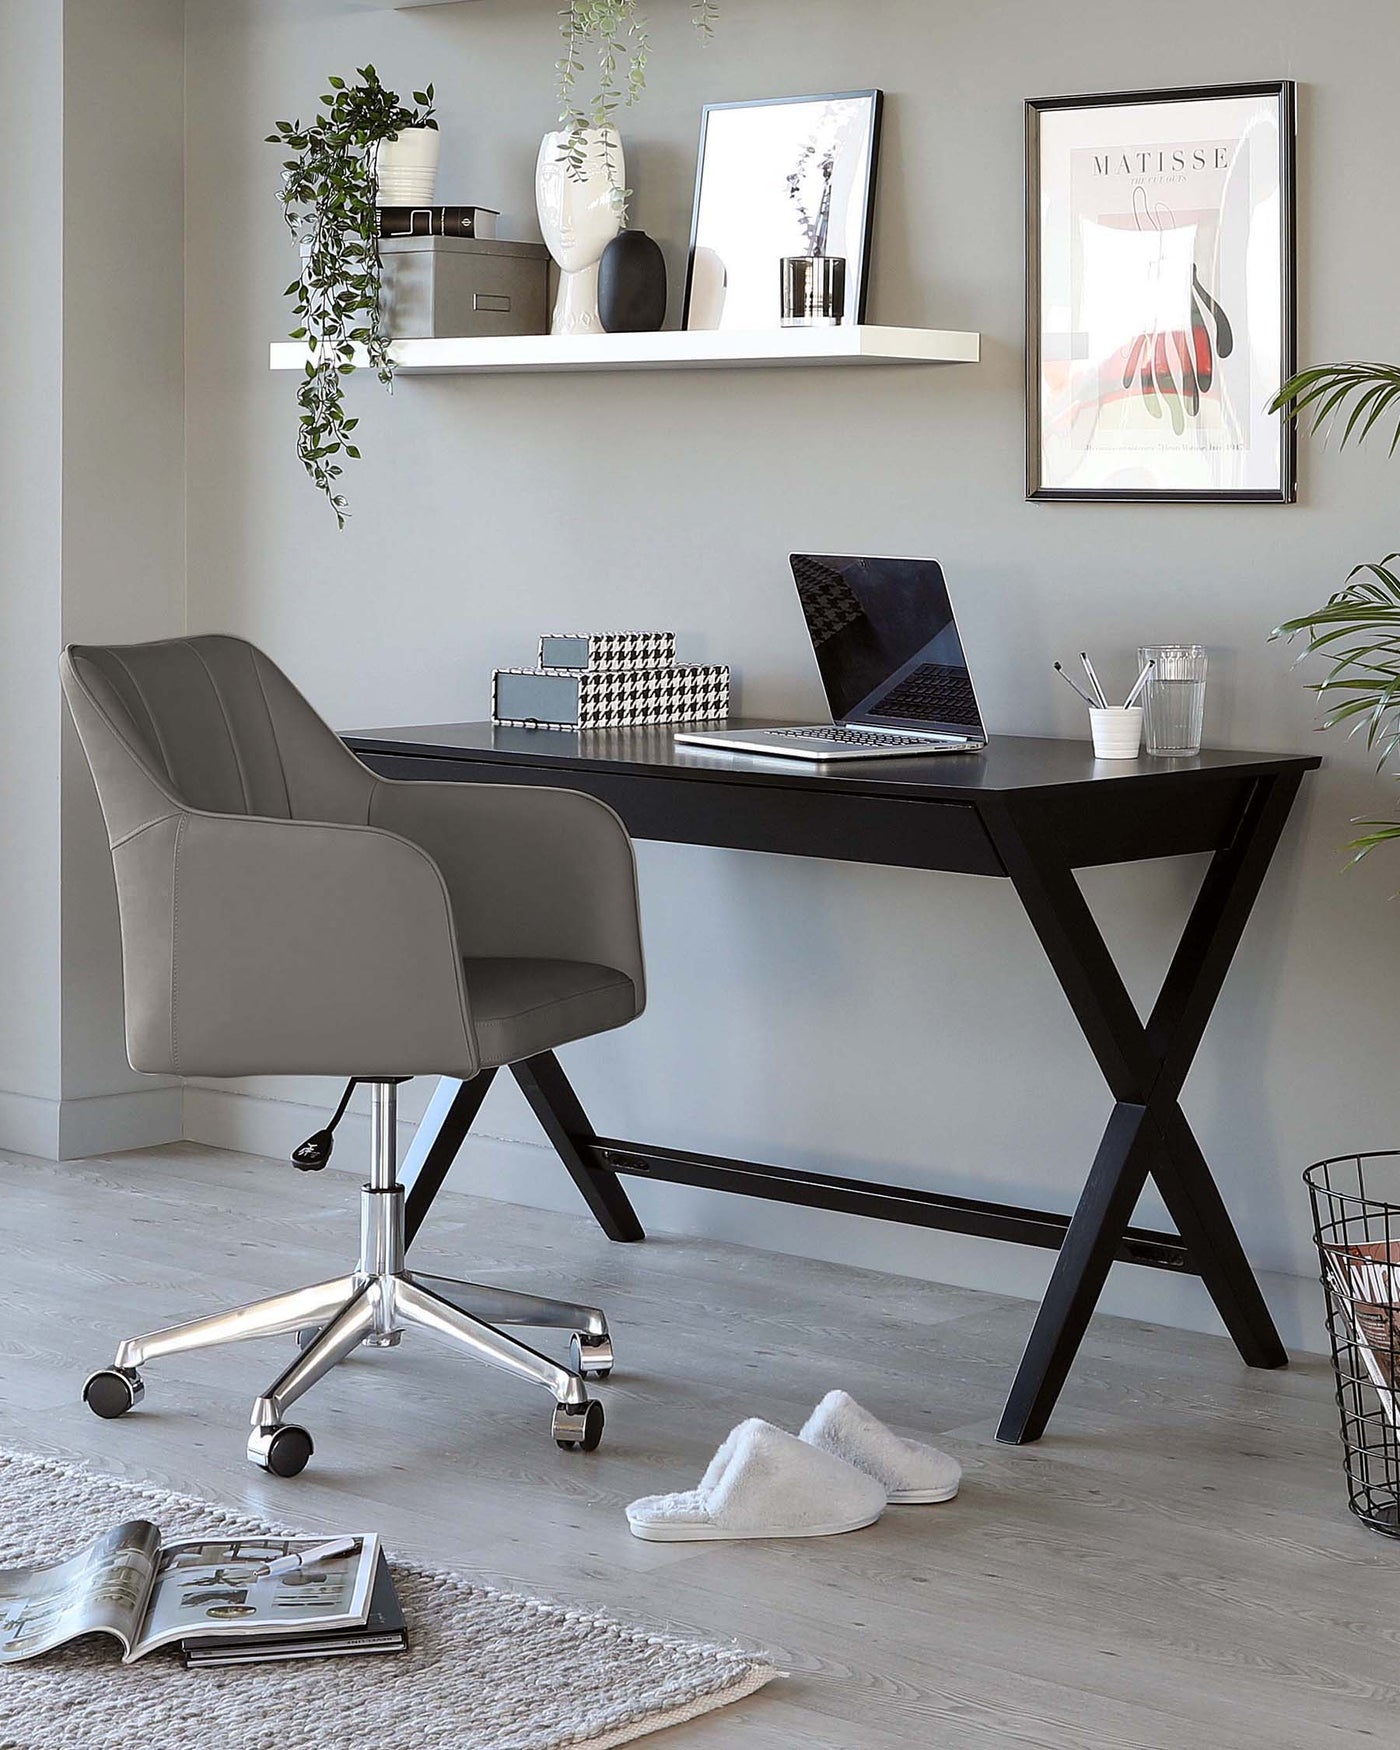 Contemporary home office setup featuring a sleek black desk with X-shaped legs and a light grey upholstered office chair with a high back and armrests, mounted on a shiny chrome base with casters for mobility.